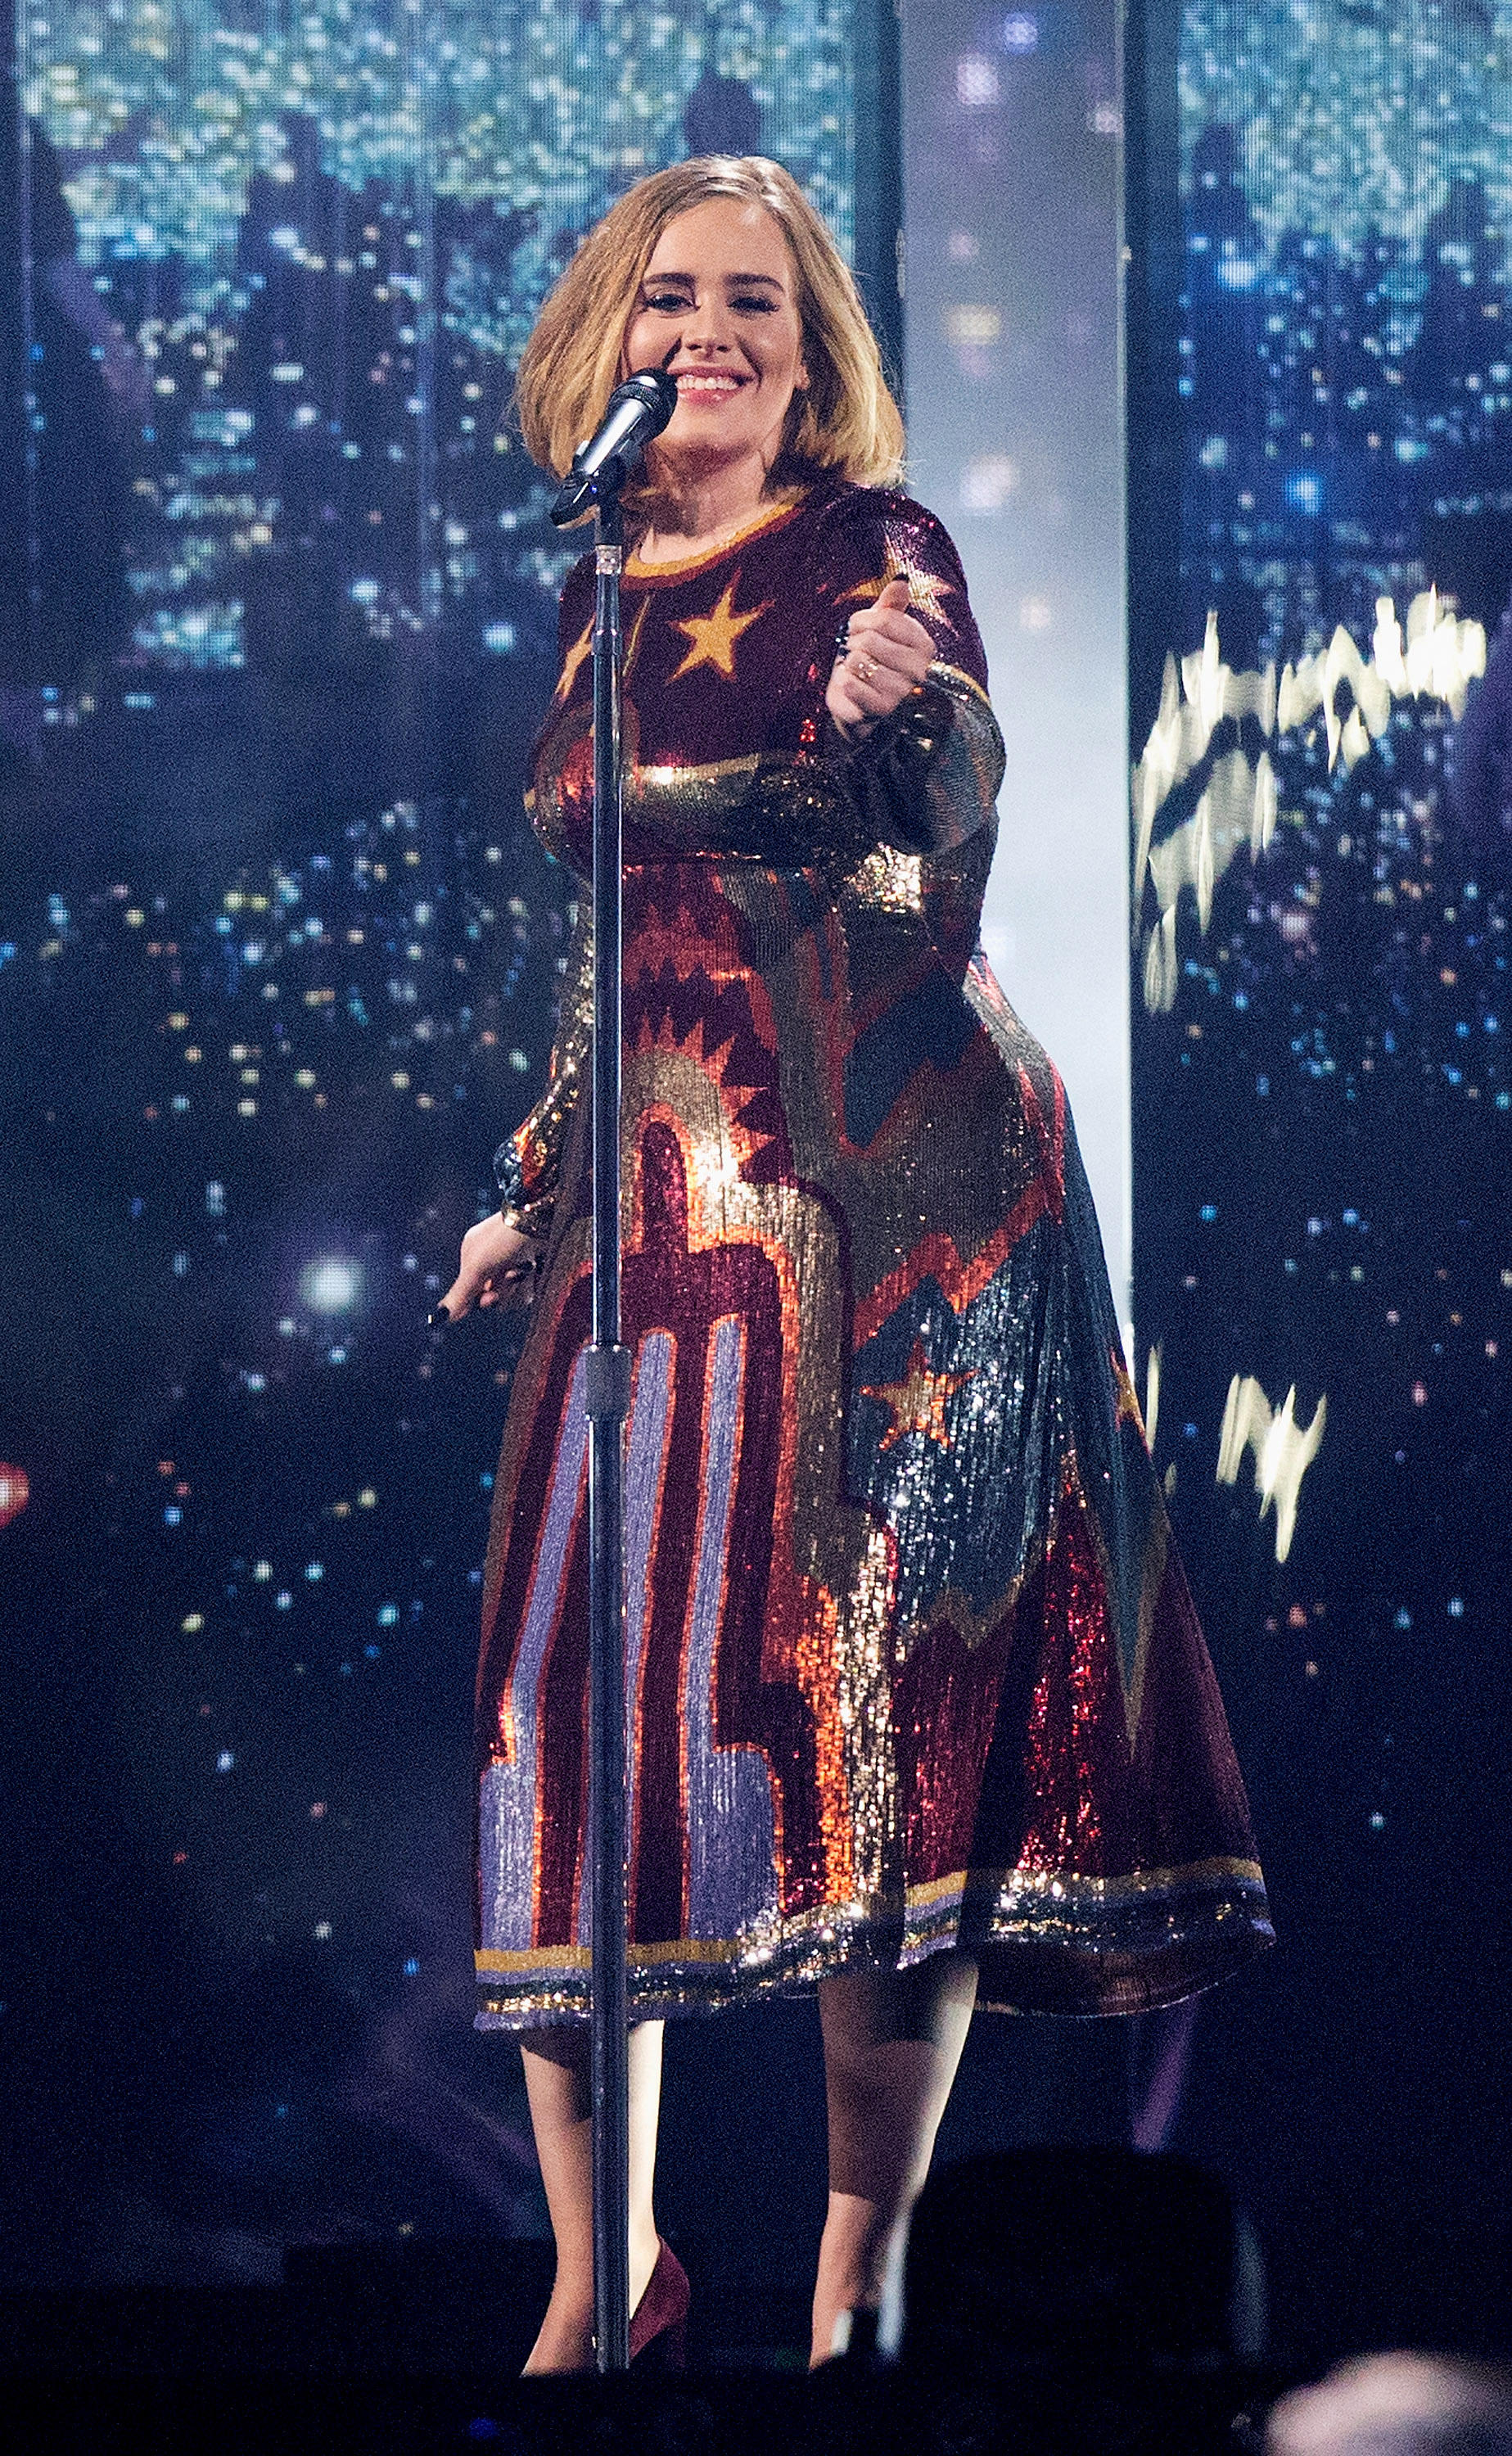 Adele in a sequined dress performing at the Brit Awards in 2016